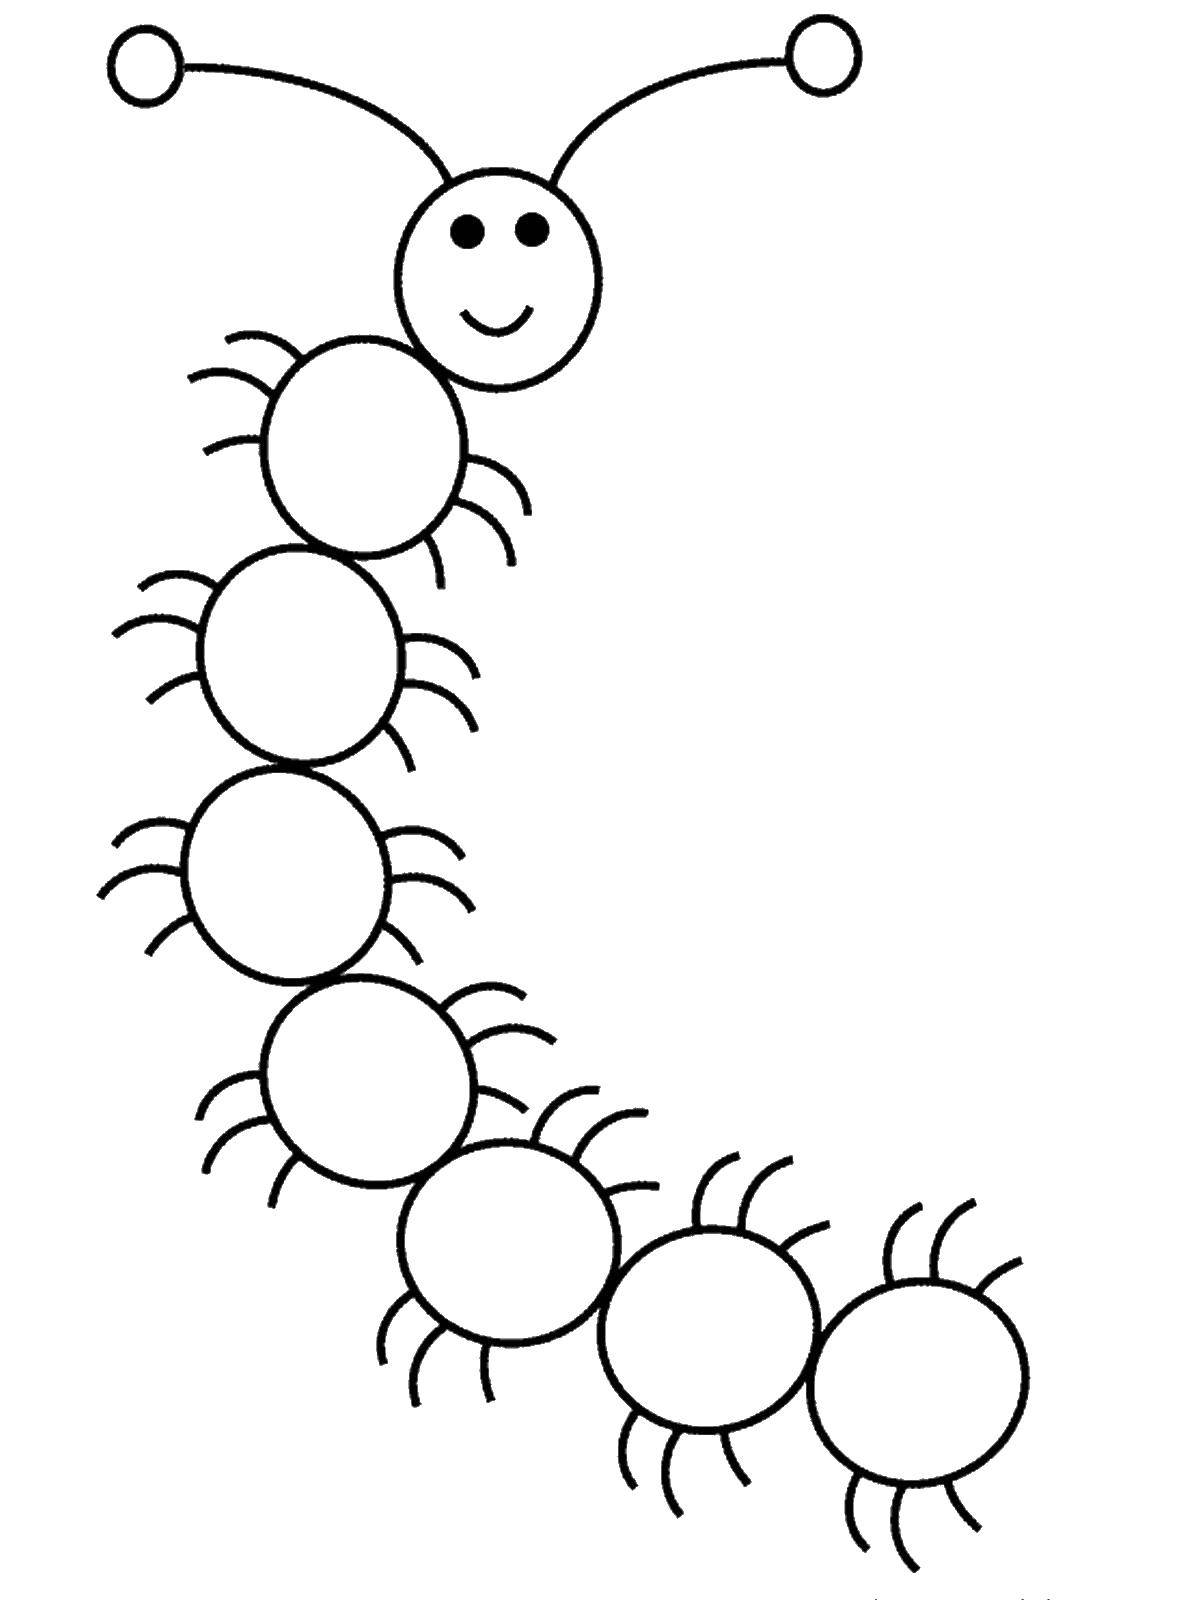 Coloring Caterpillar. Category Insects. Tags:  caterpillars, beetles.